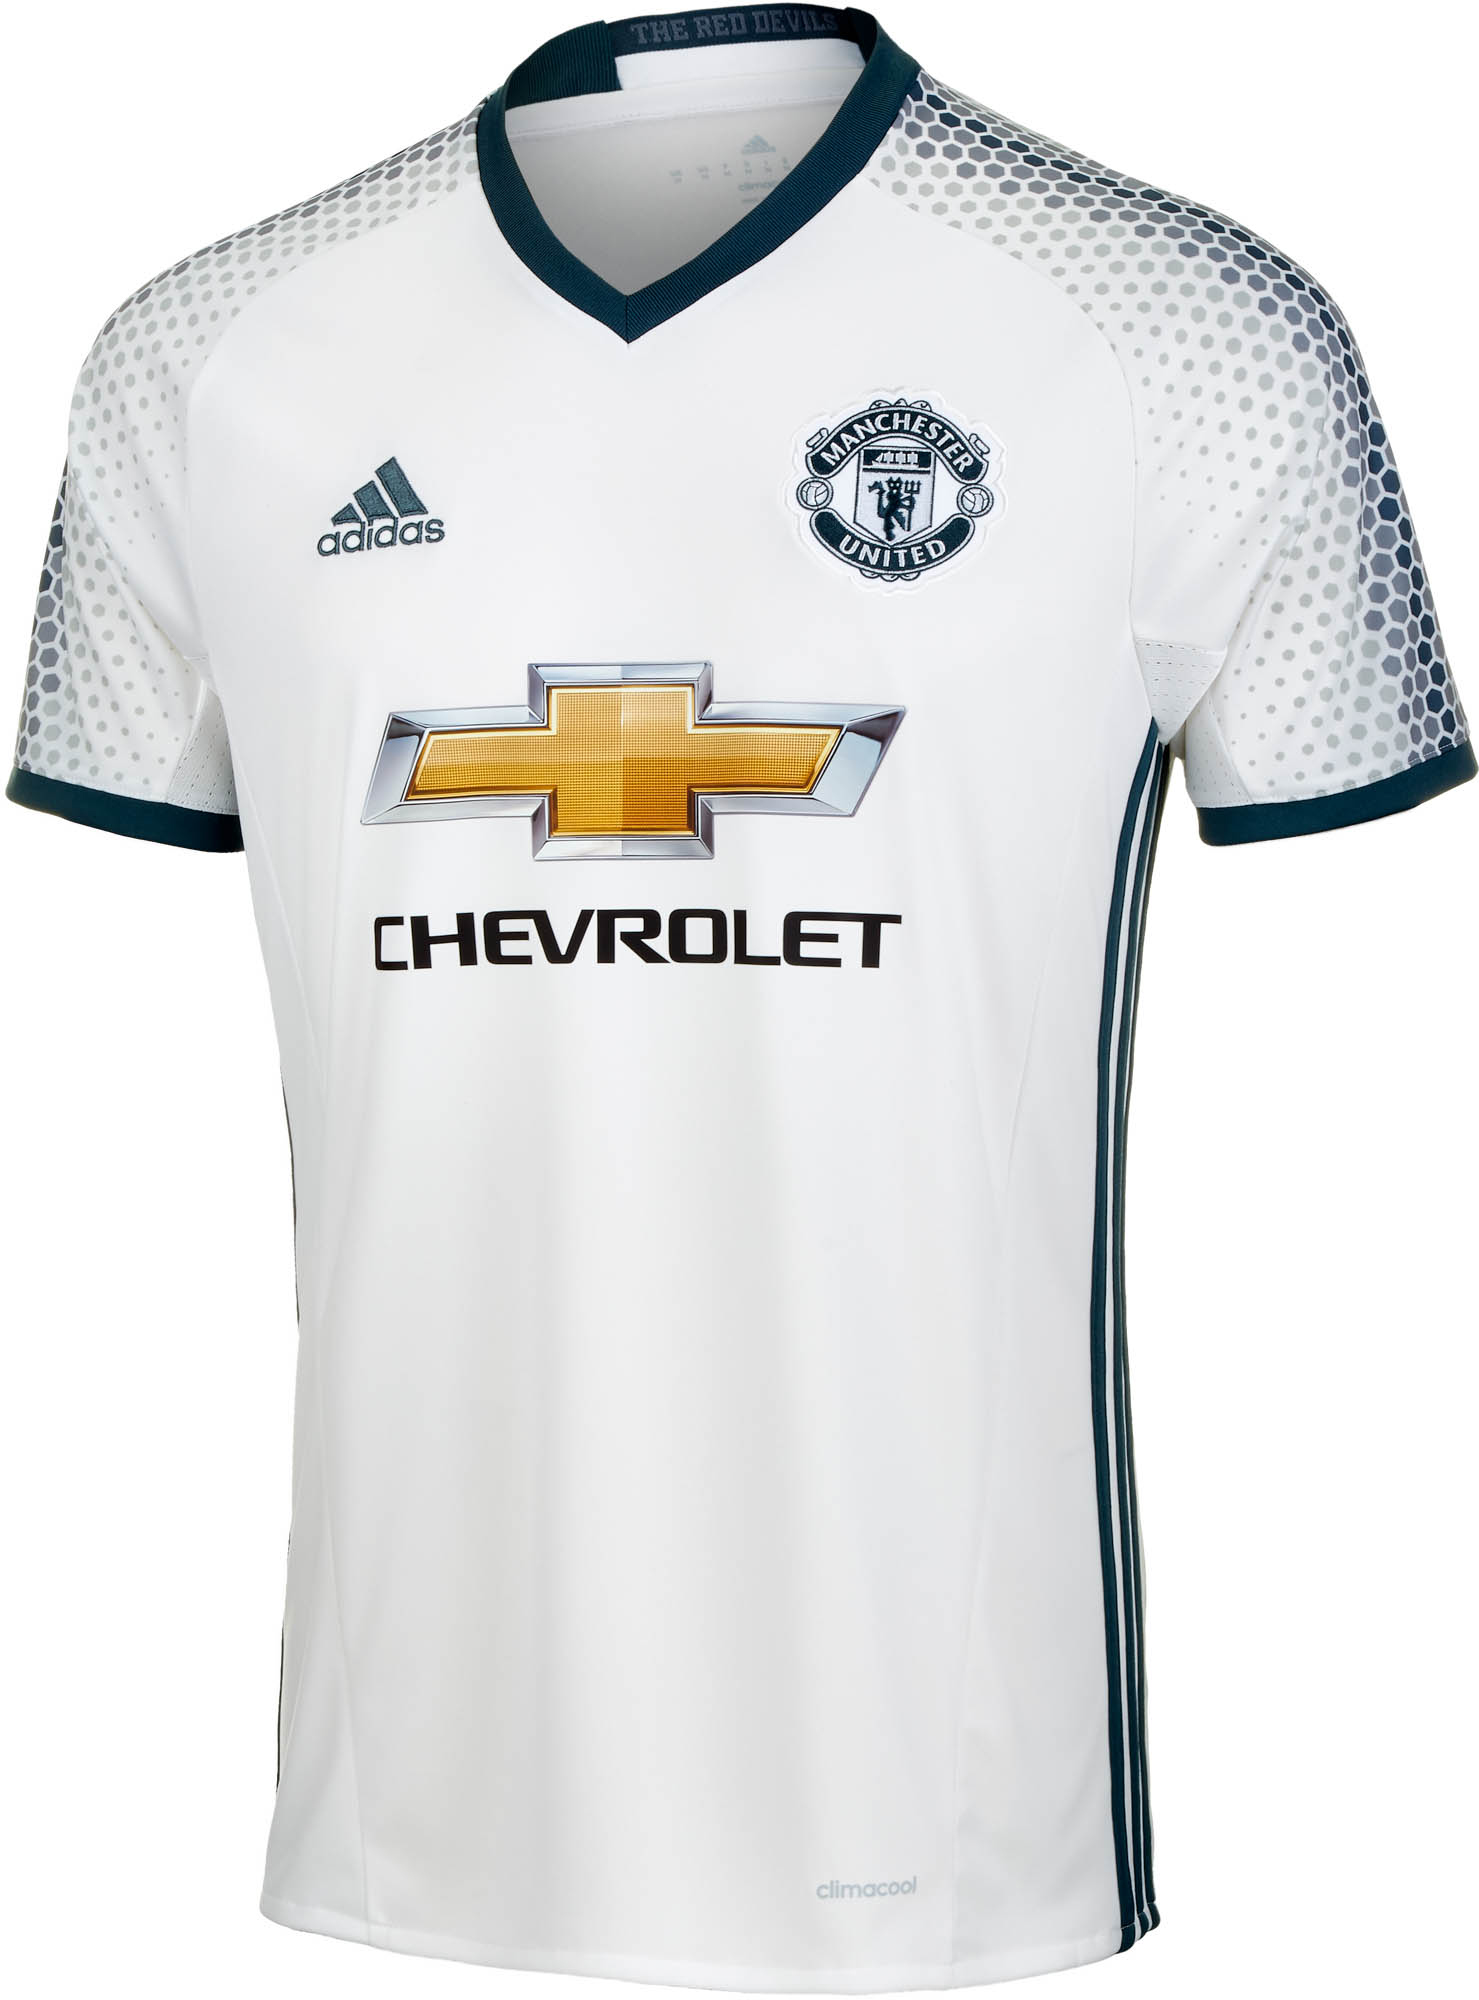 adidas Manchester United 3rd Jersey - 2016 Manchester United Jerseys